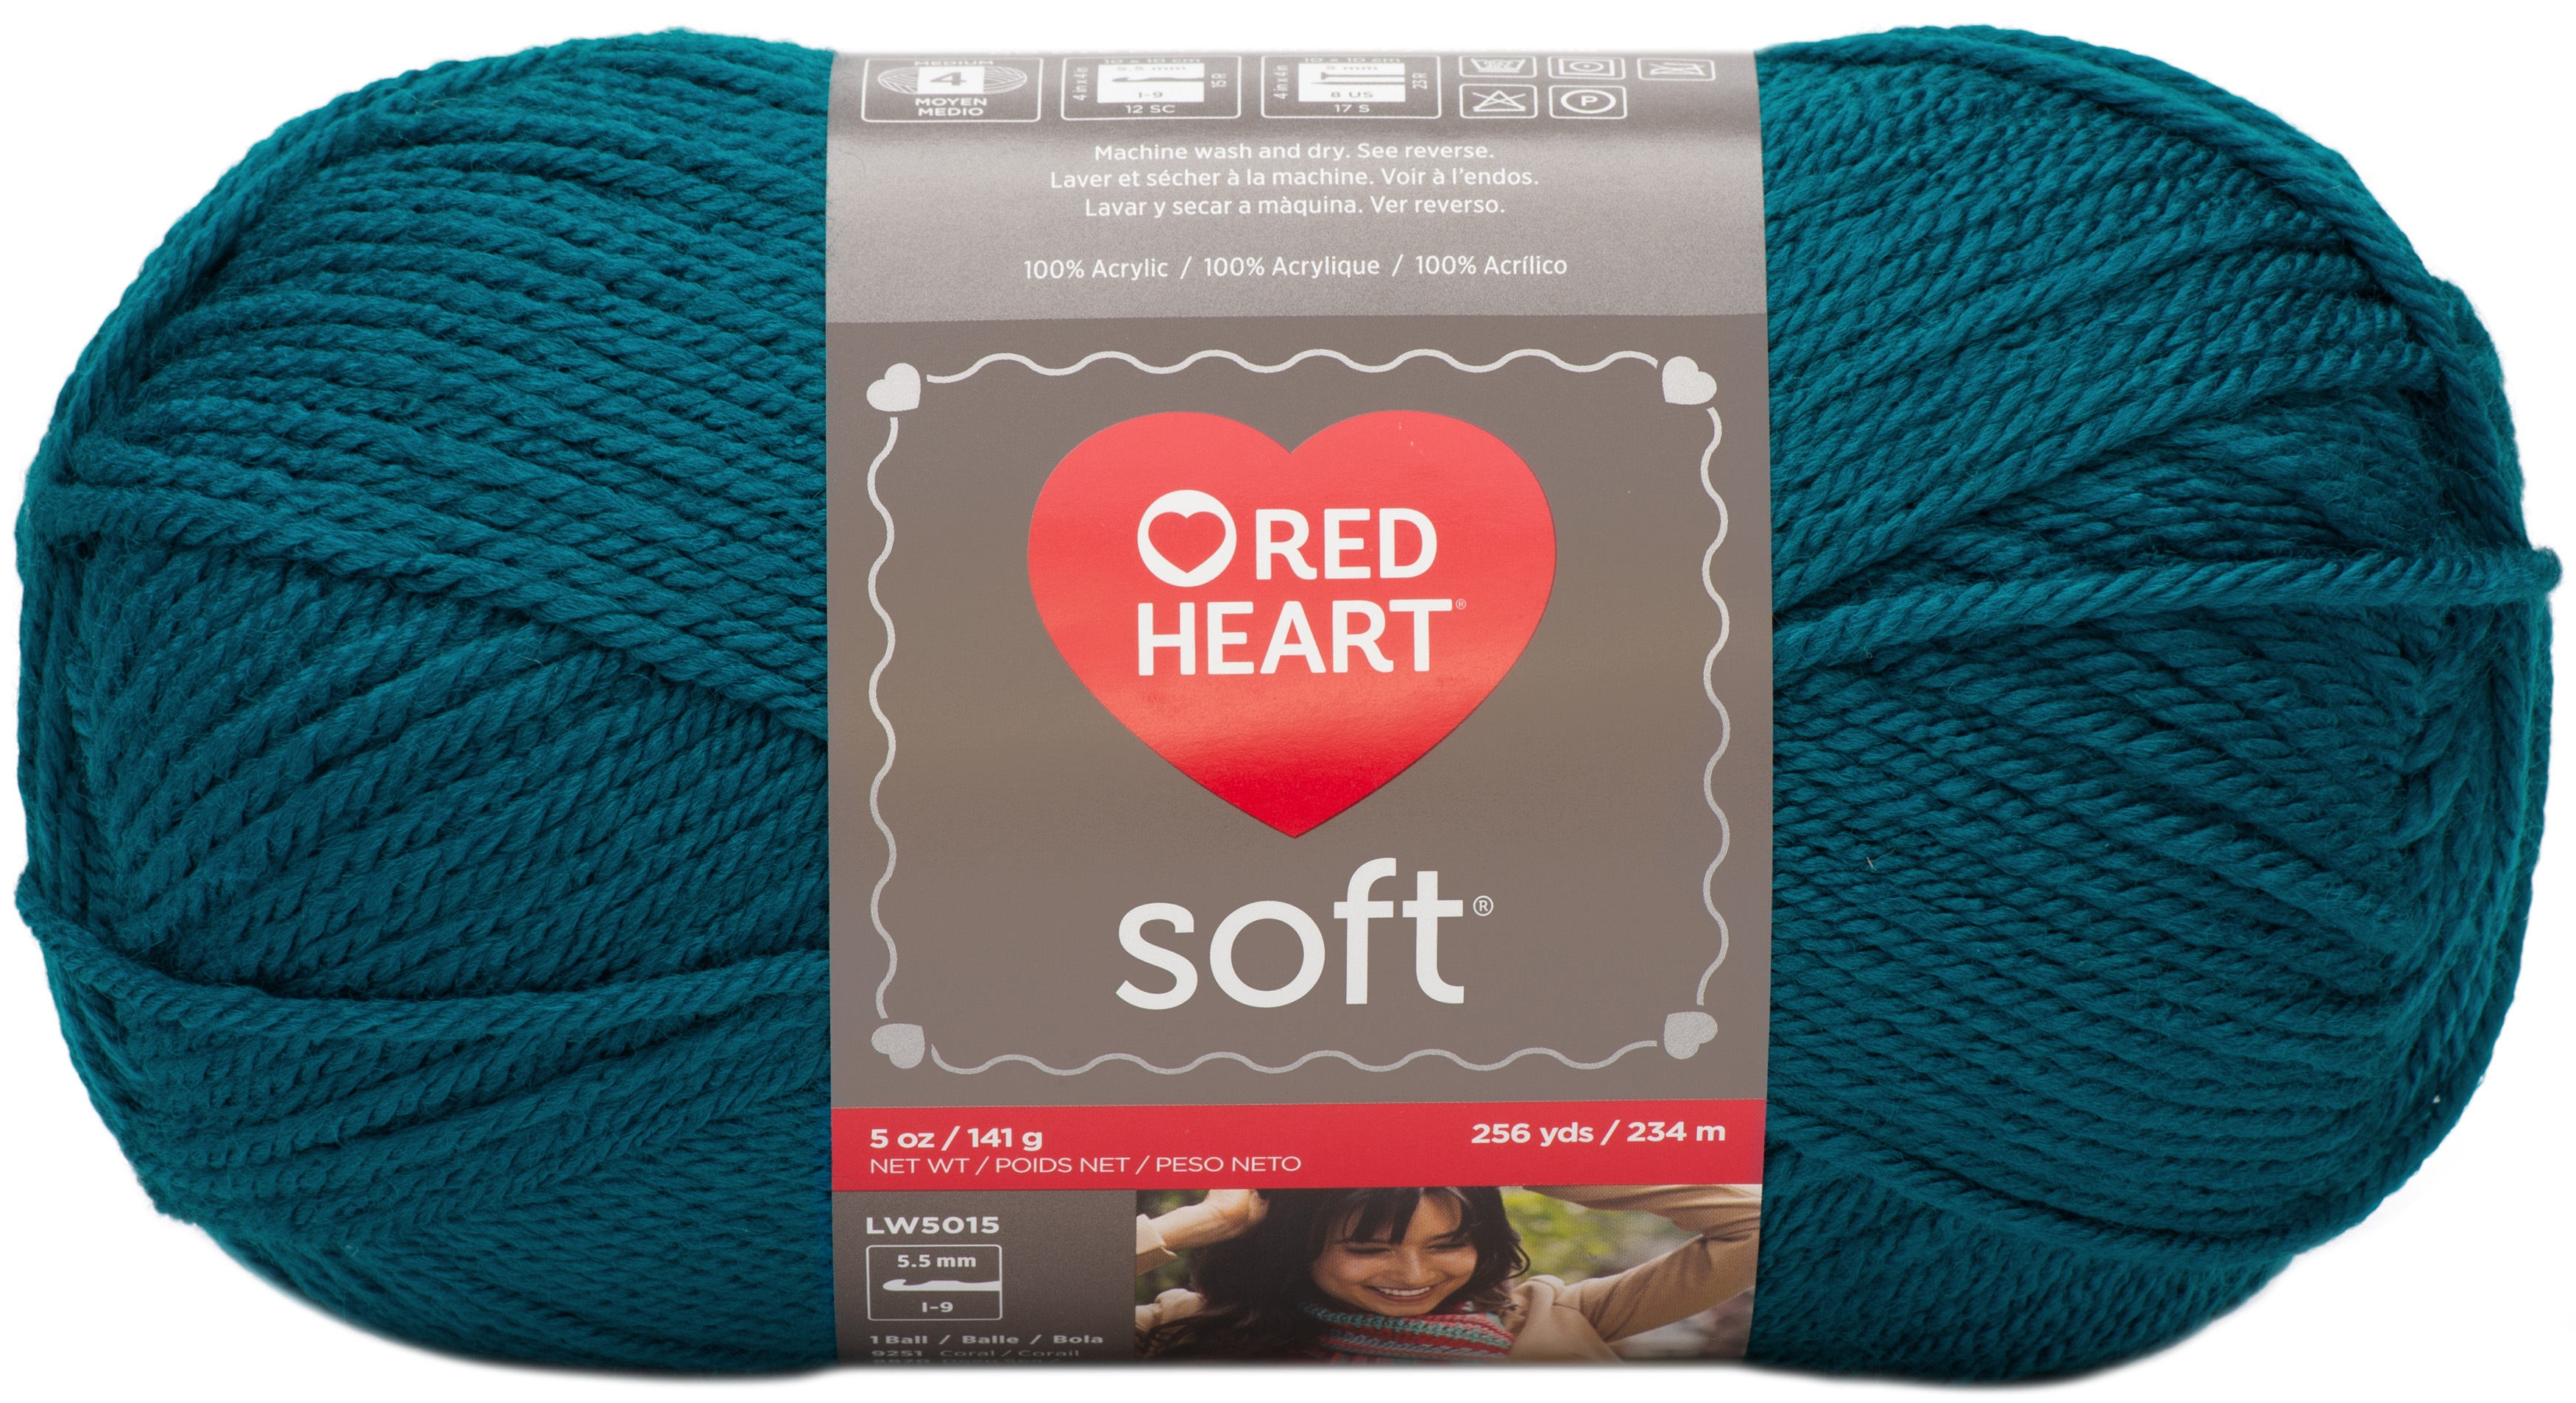 Red Heart Soft Yarn-Teal - image 2 of 2